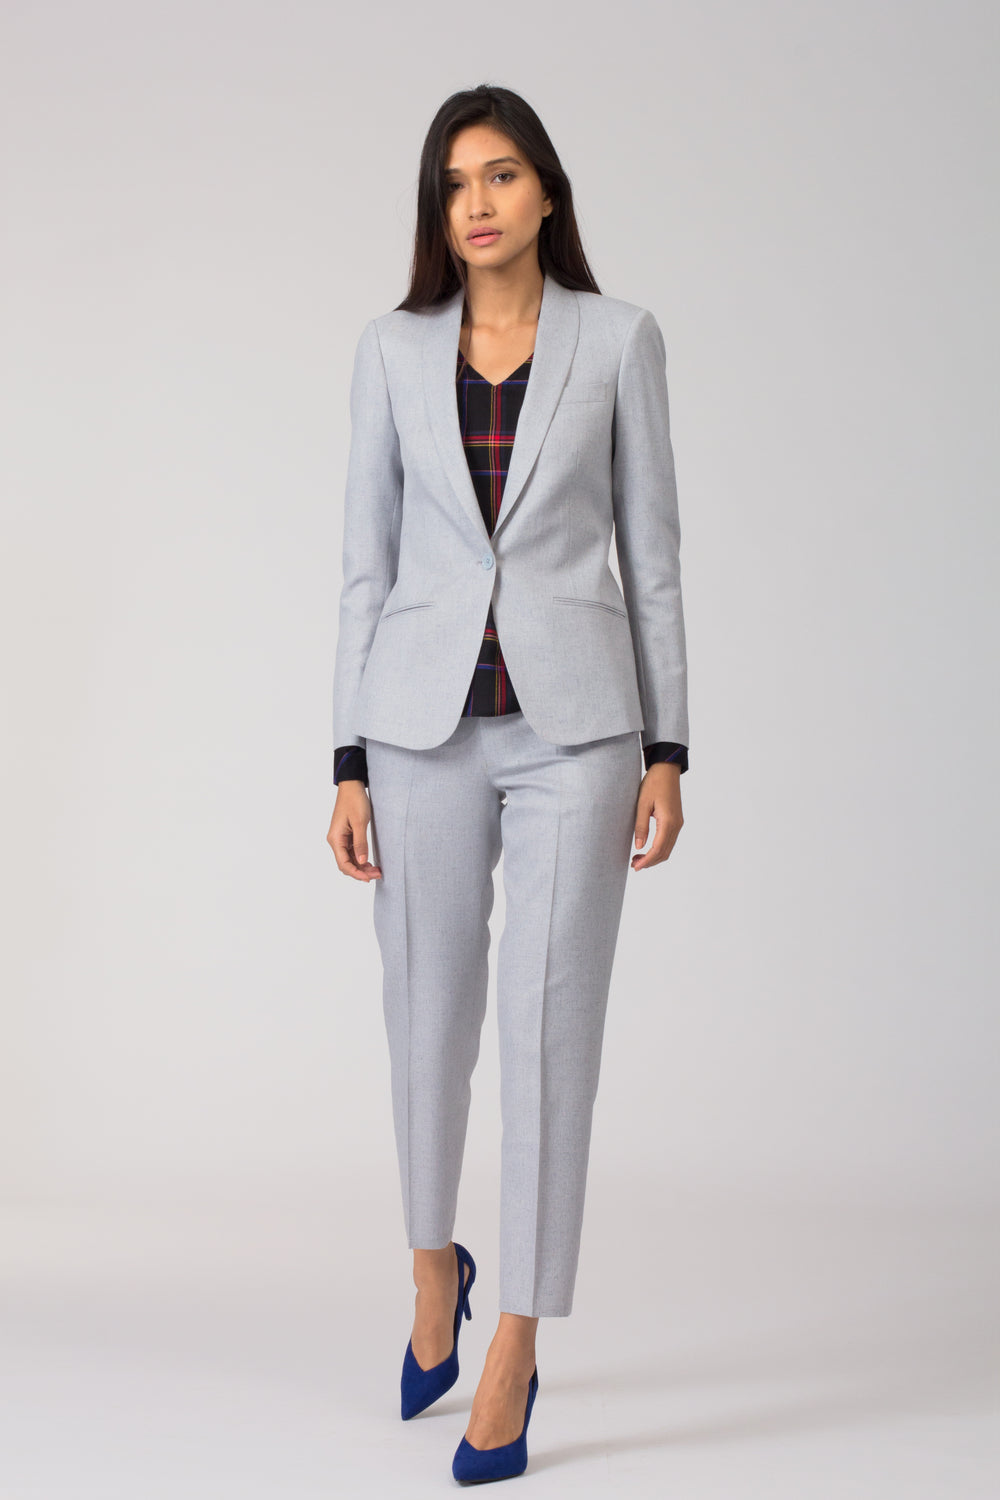 Business Pants Suit Women New Fashion Temperament Long Sleeve Slim Blazer  And Trousers Office Lady Formal Interview Work Wear  Fruugo IN